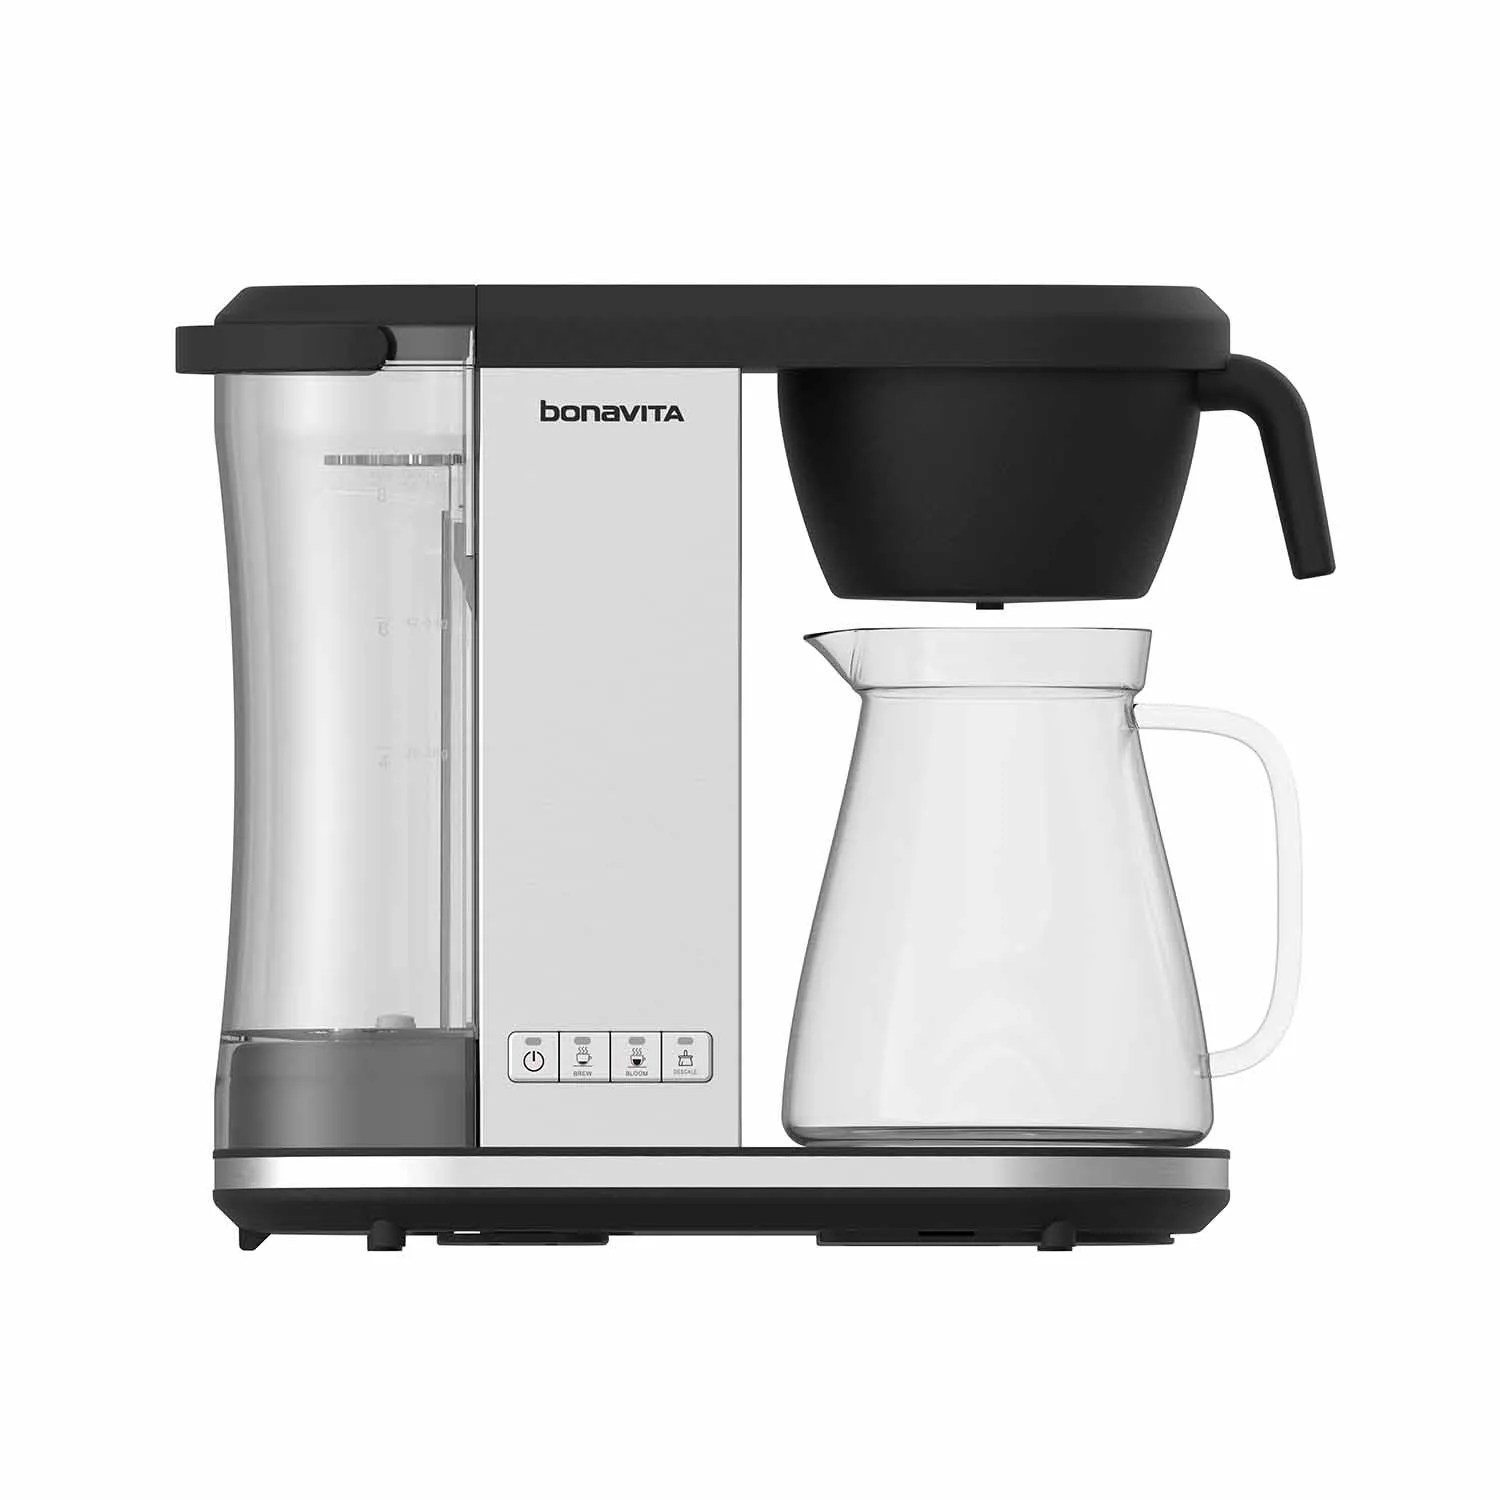 Bonavita 5-Cup Stainless Steel Carafe Coffee Brewer – The